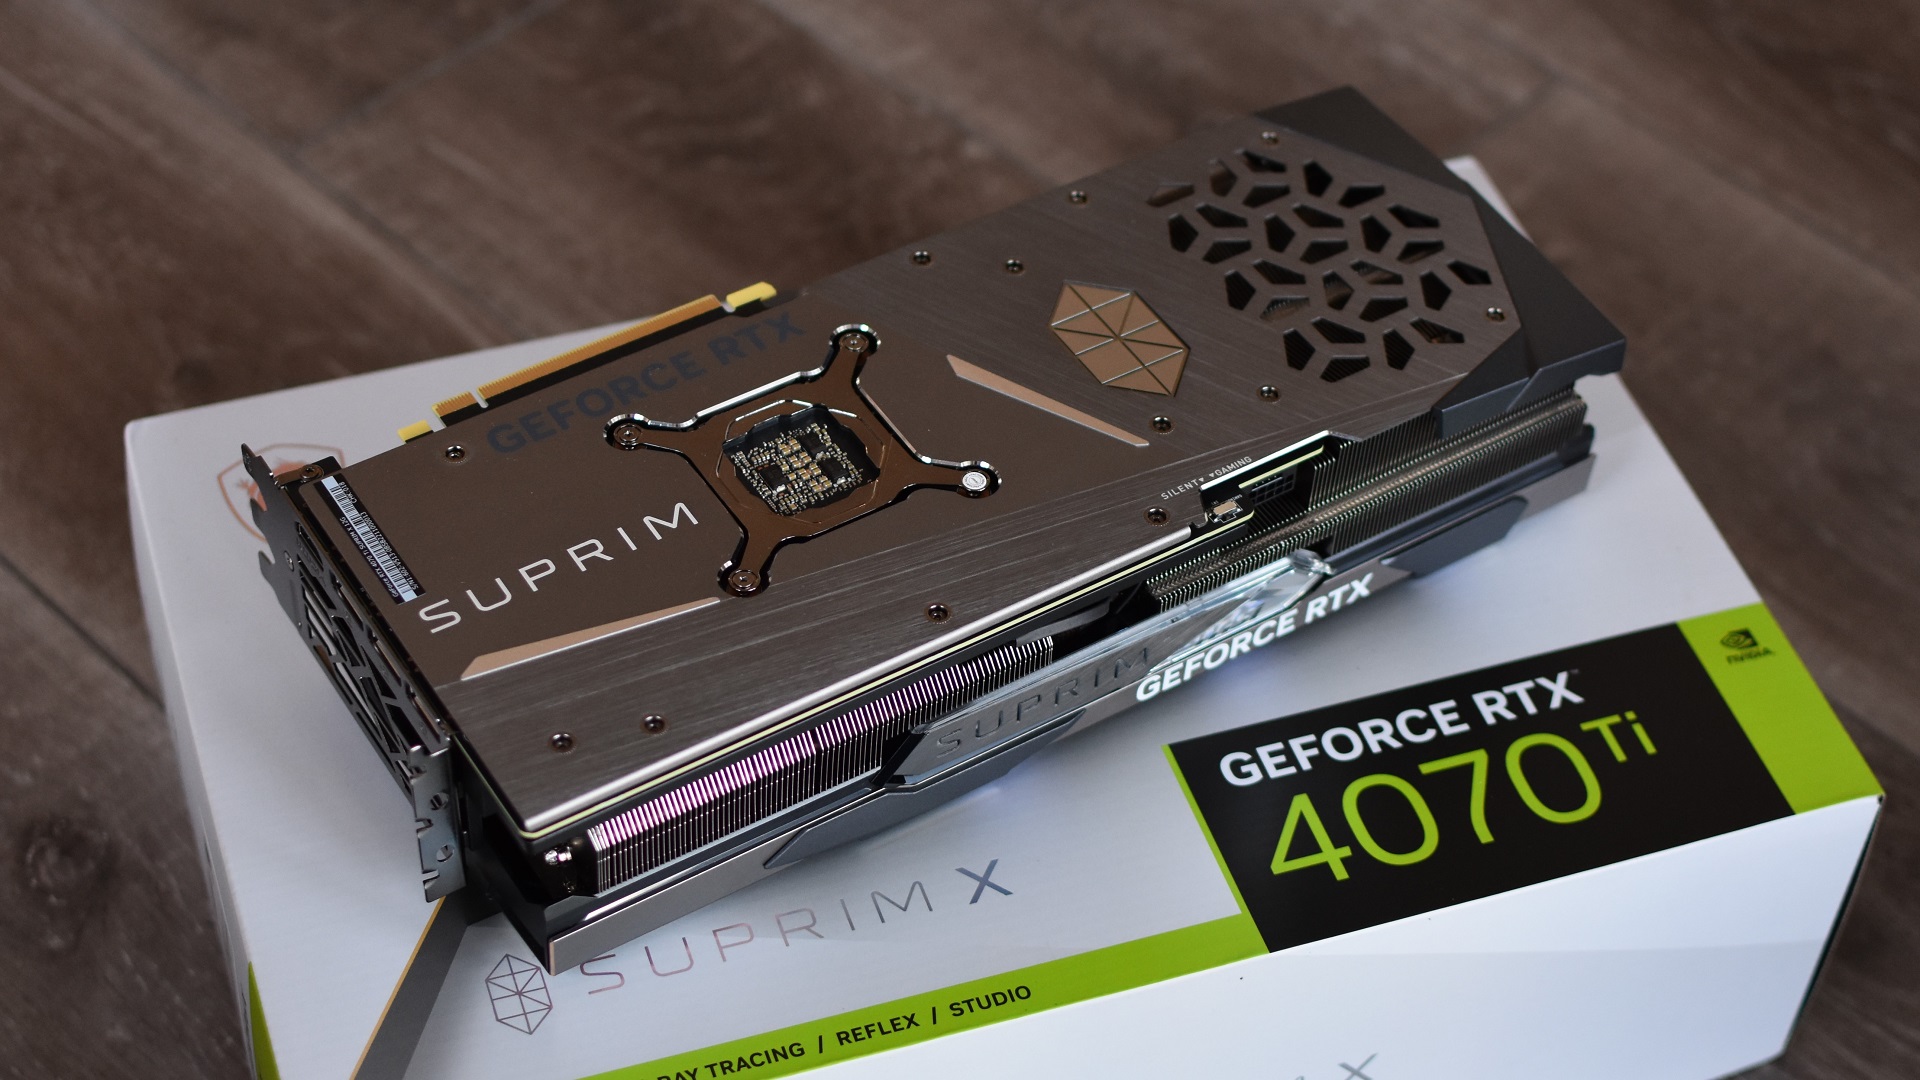 The MSI GeForce RTX 4070 Ti Suprim X 12G graphics card, sat backplate side-up, on top of its own box.